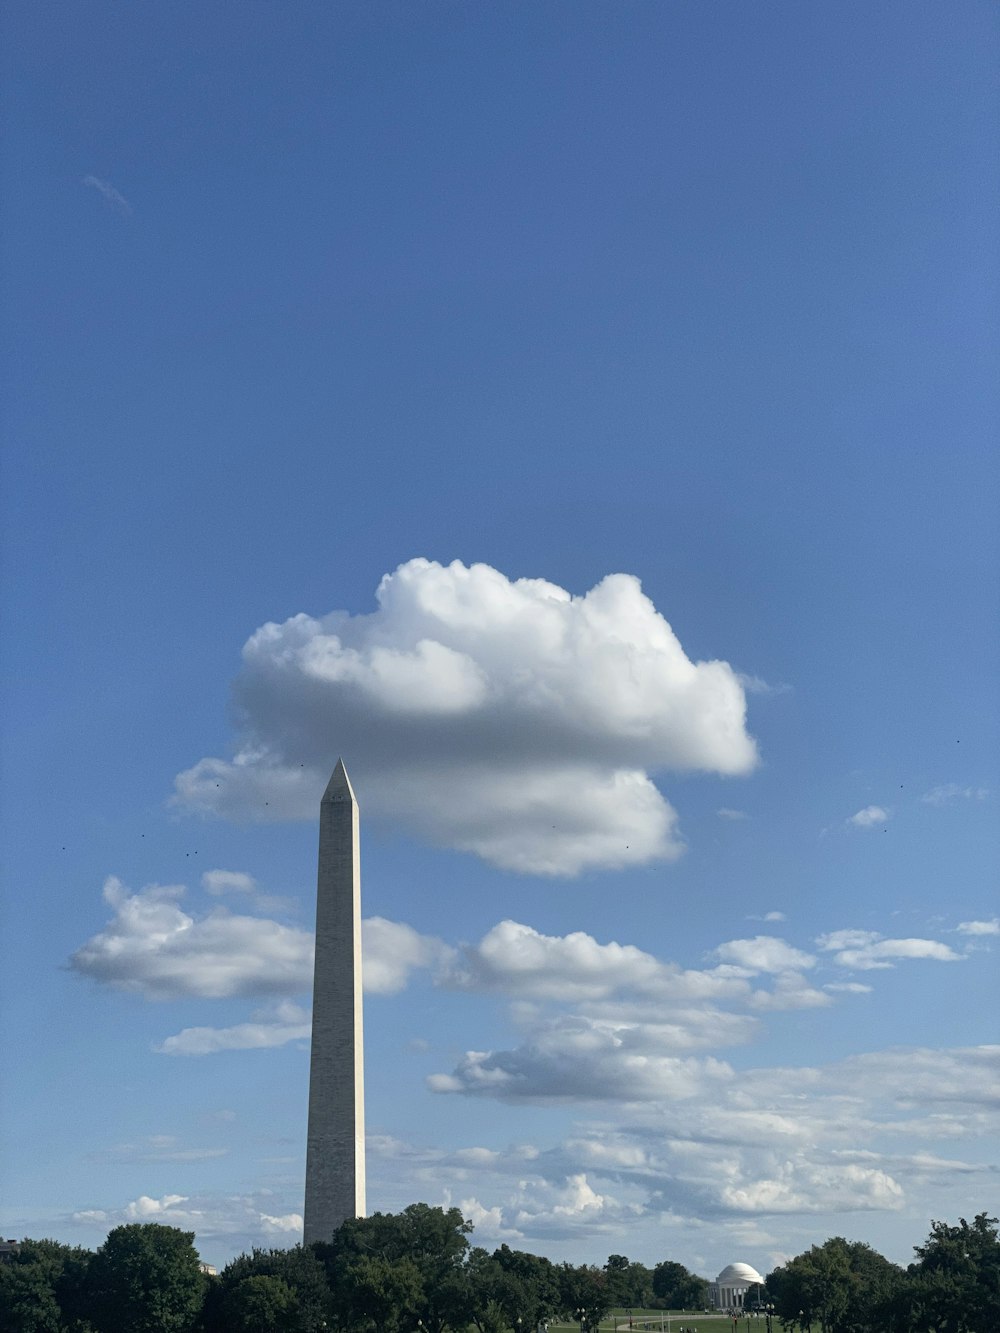 a tall tower with clouds in the sky